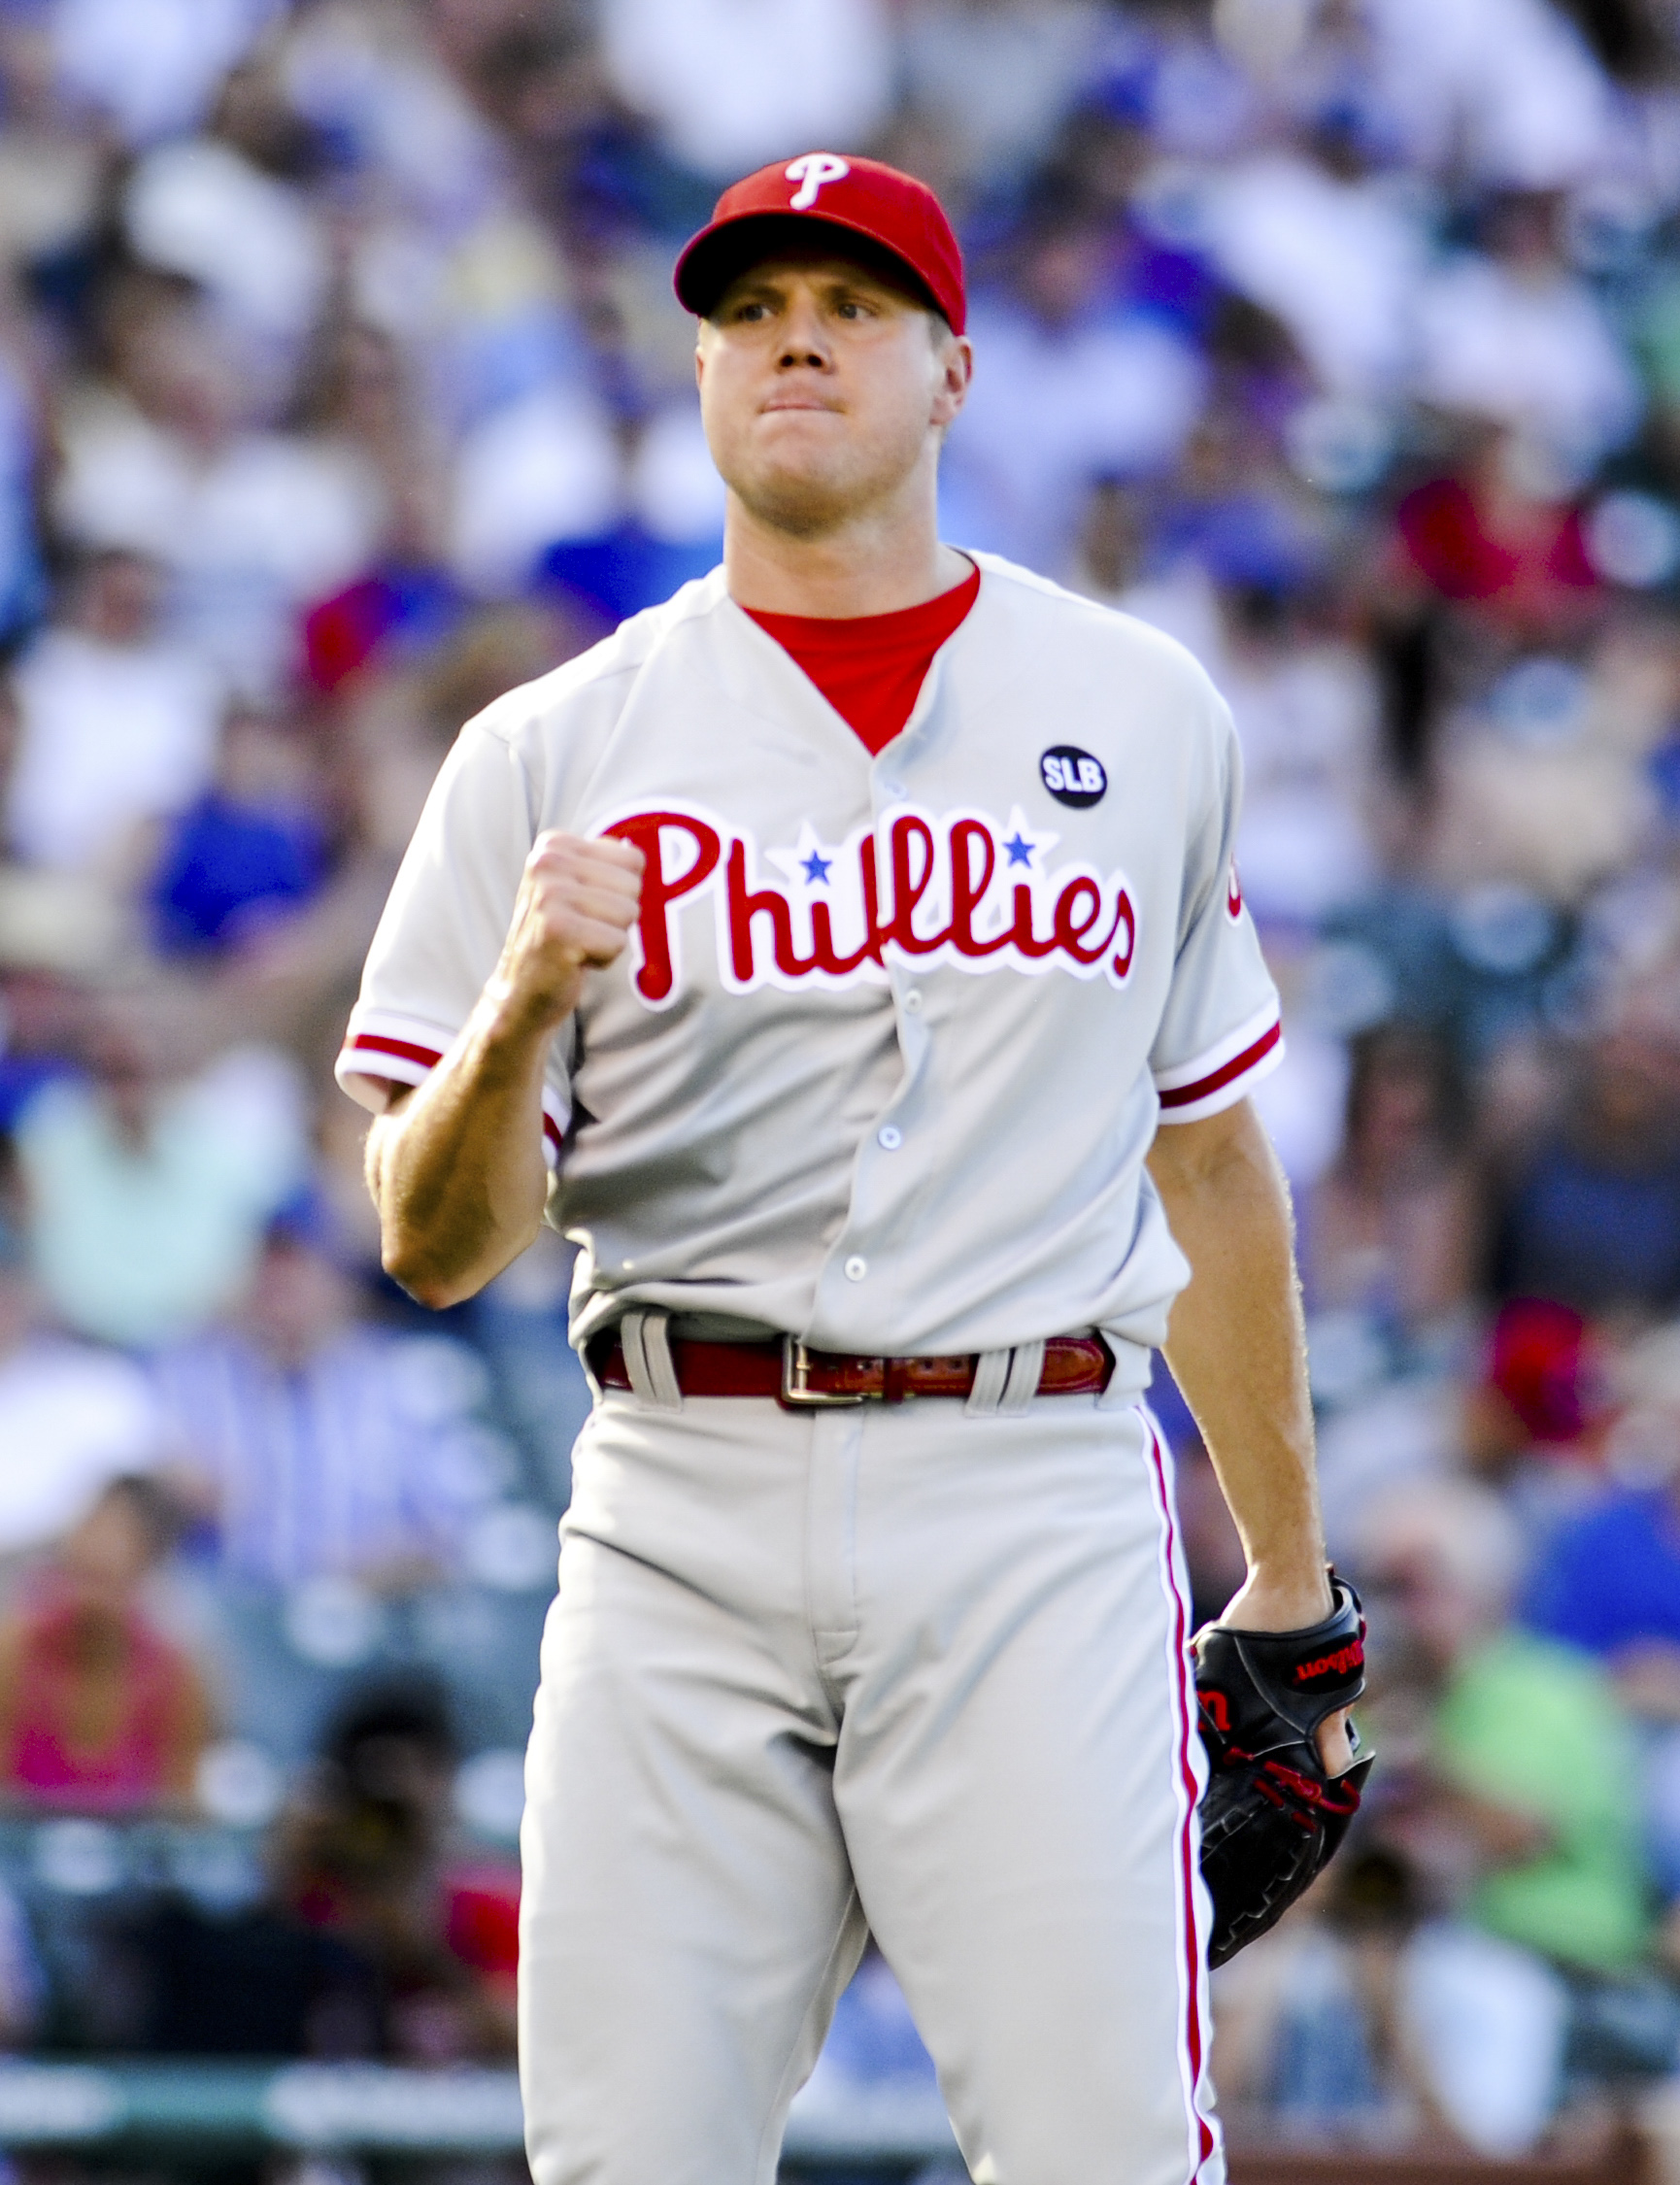 Jonathan Papelbon helps fight against cancer